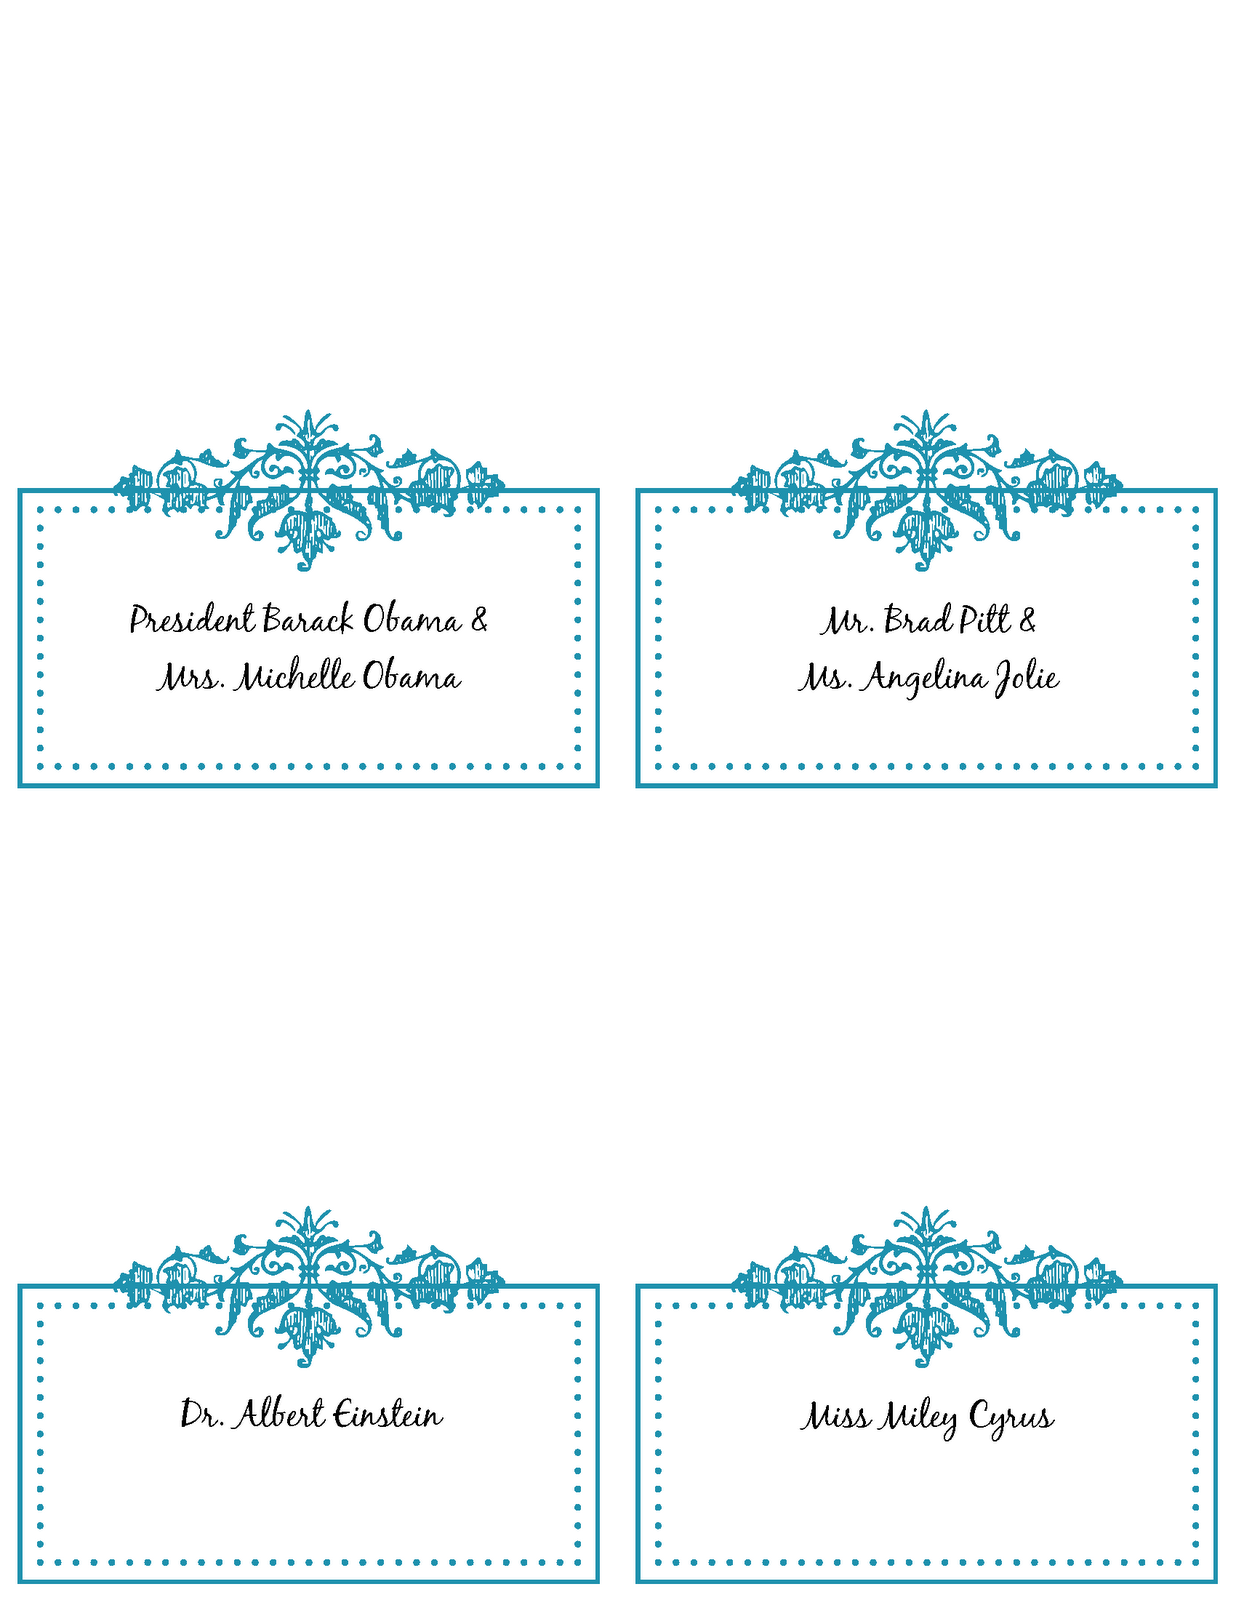 print table cards